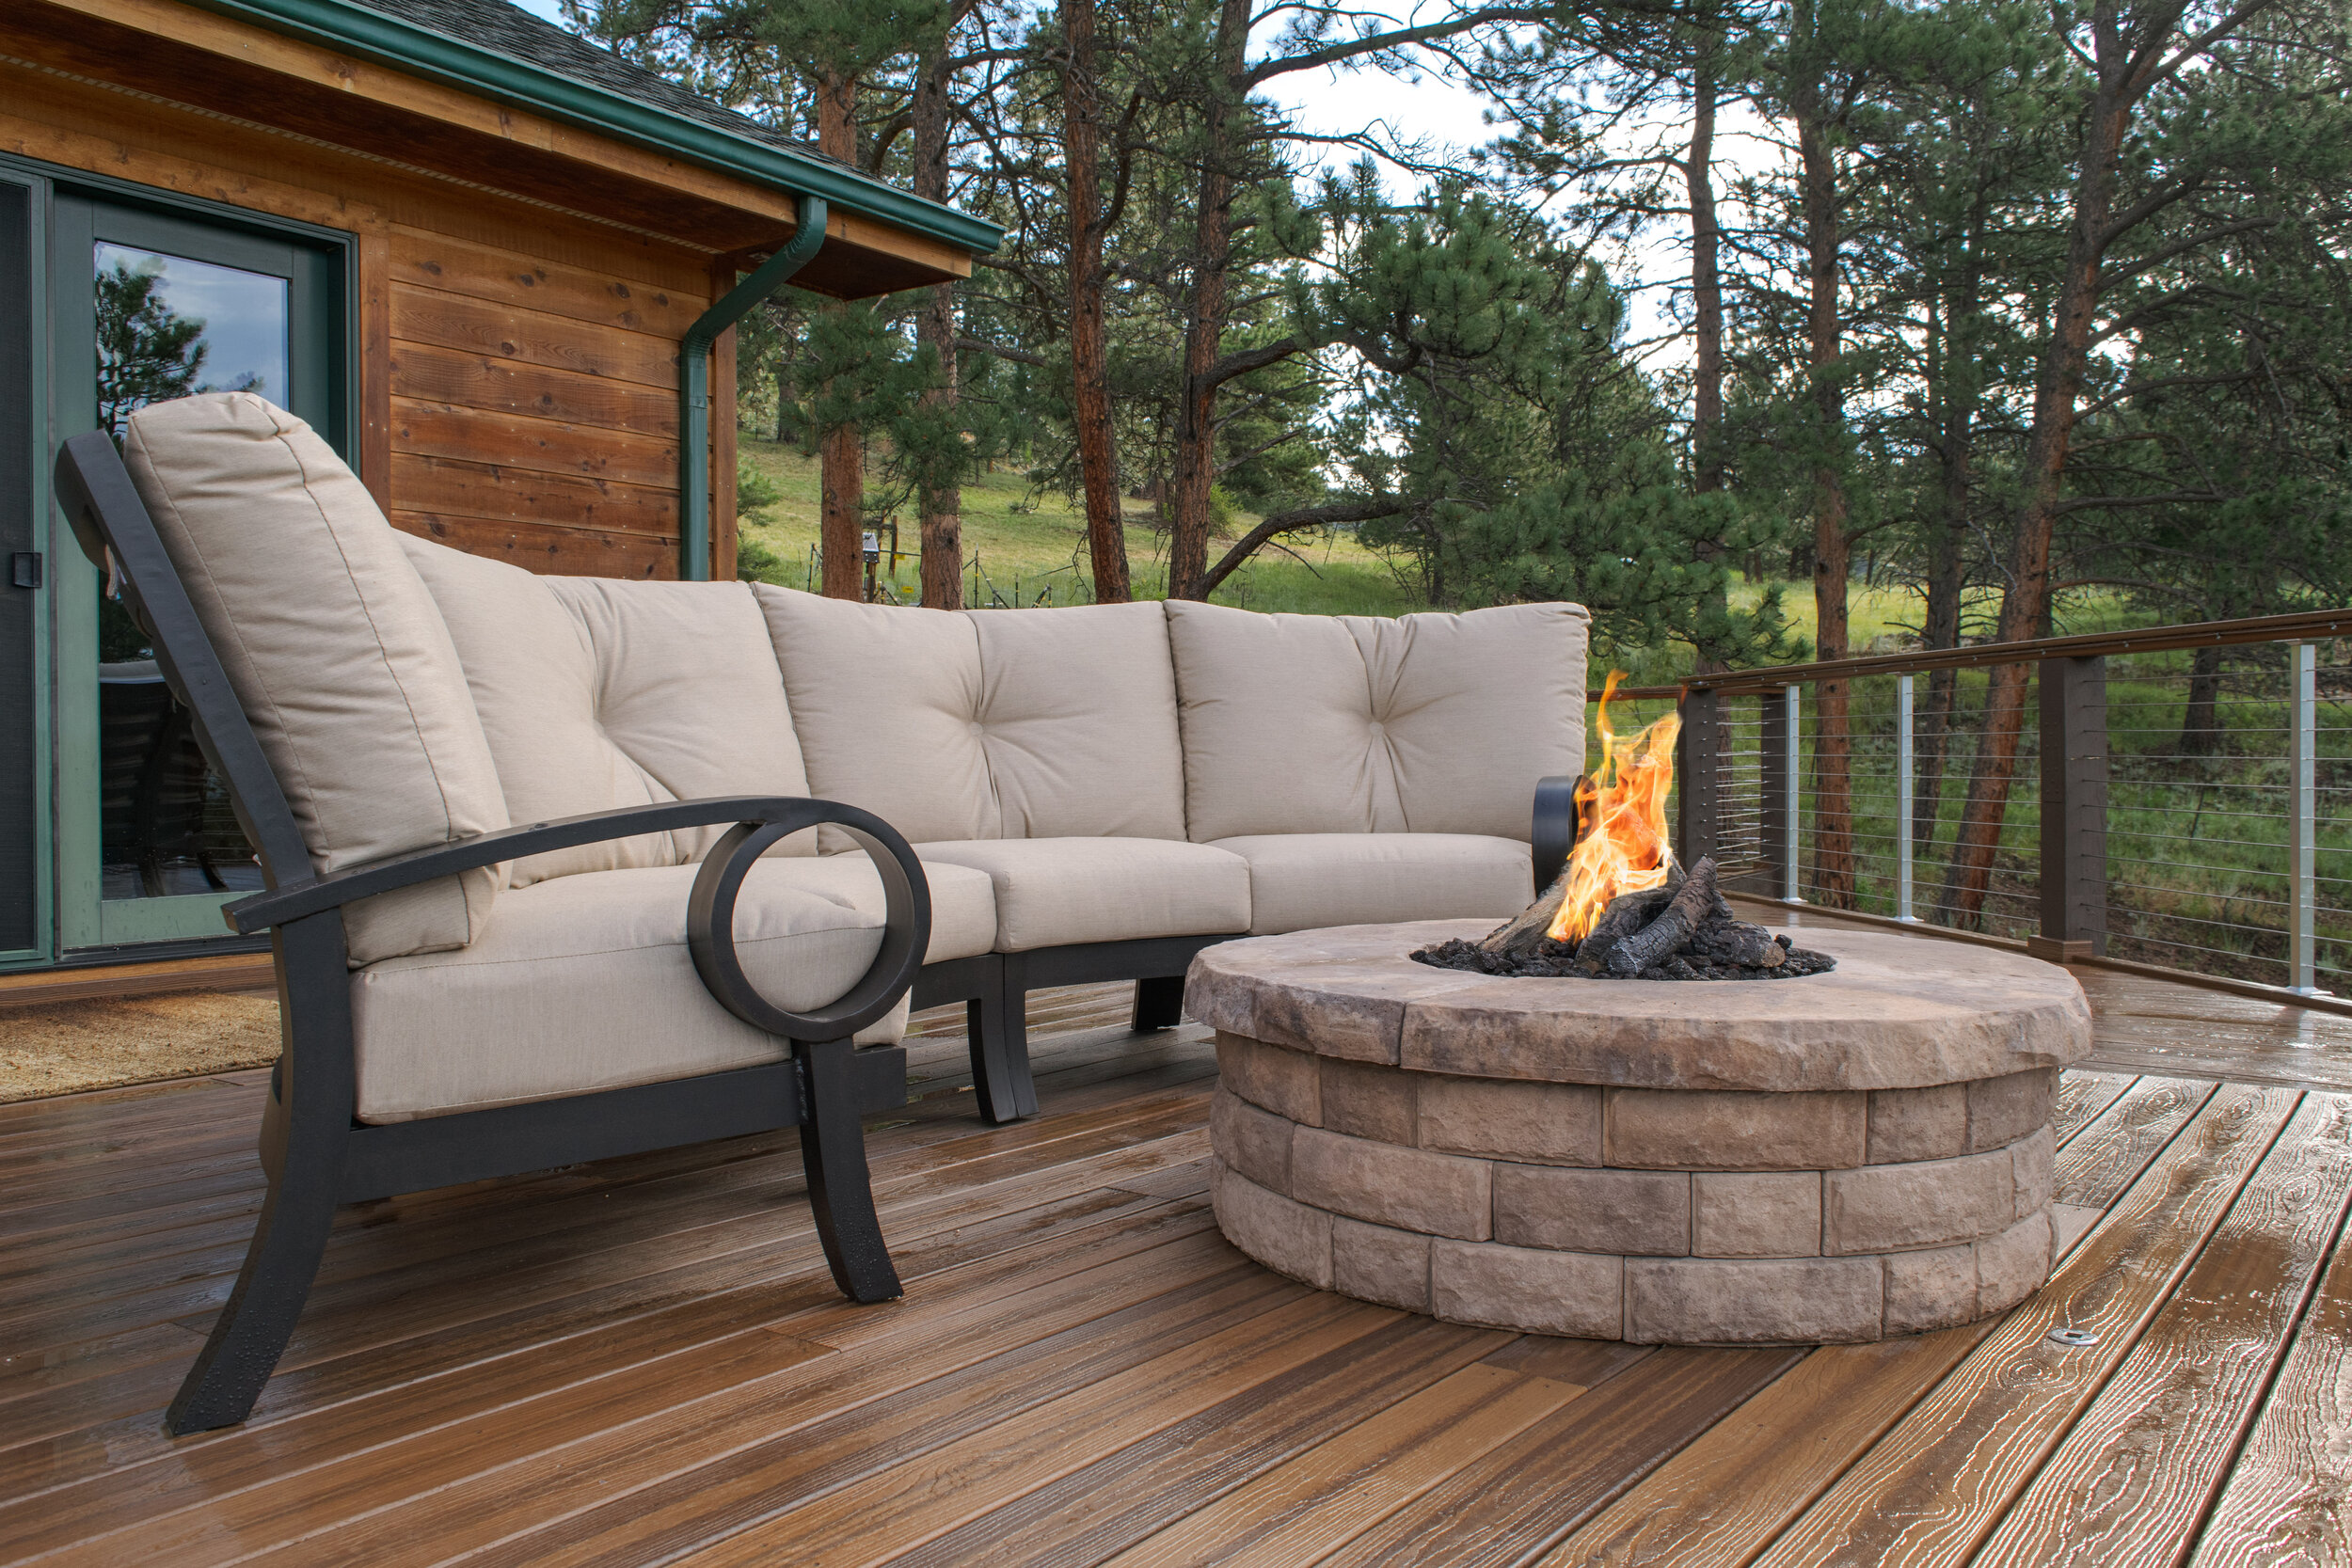 Outdoor Space With A Gas Fire Pit, How To Make Gas Fire Pit Warmer